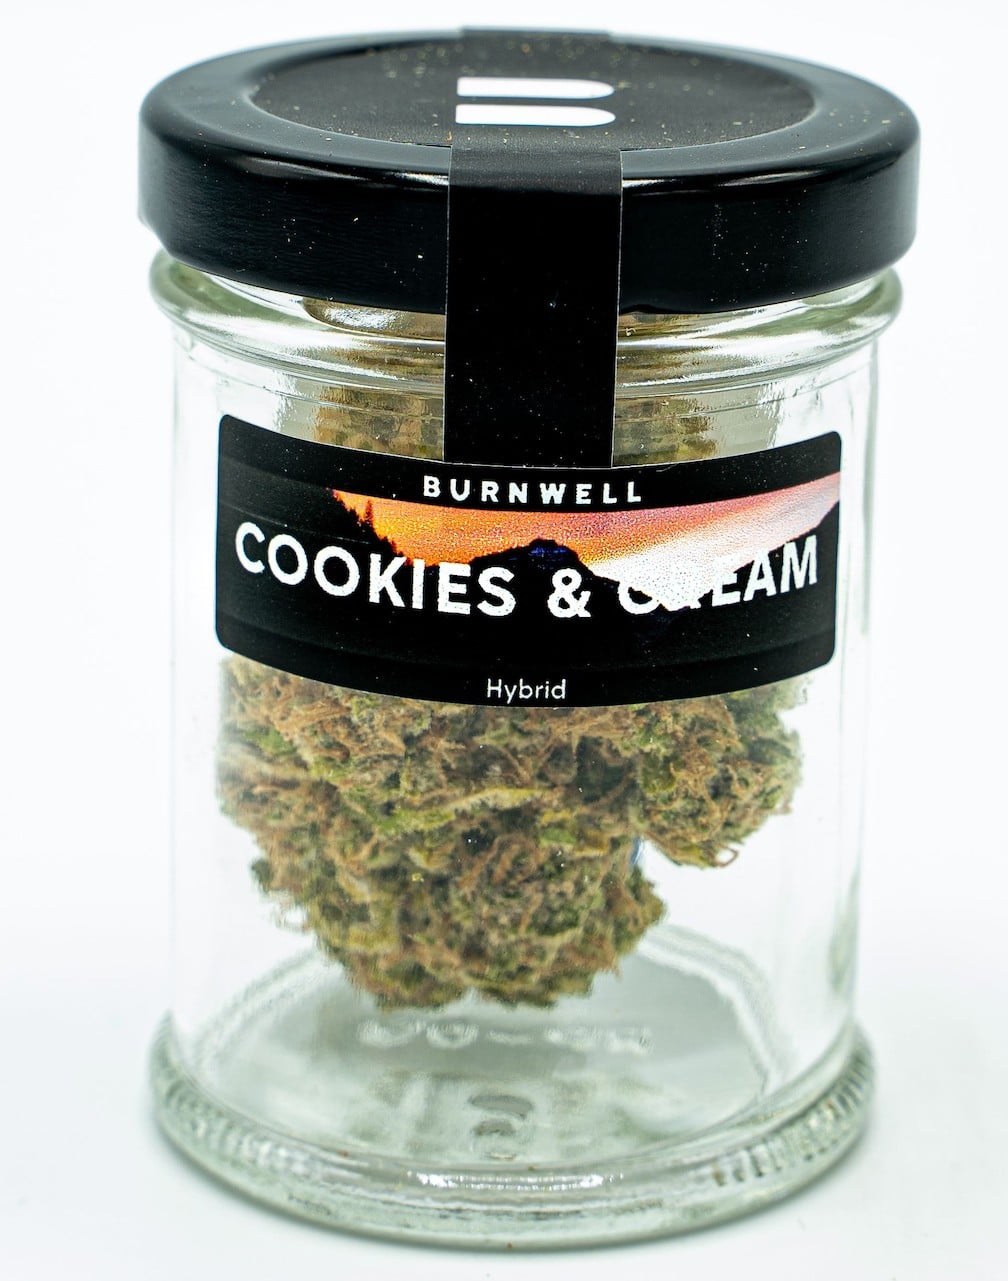 Cookies and Cream Cannabis Strain from Burnwell